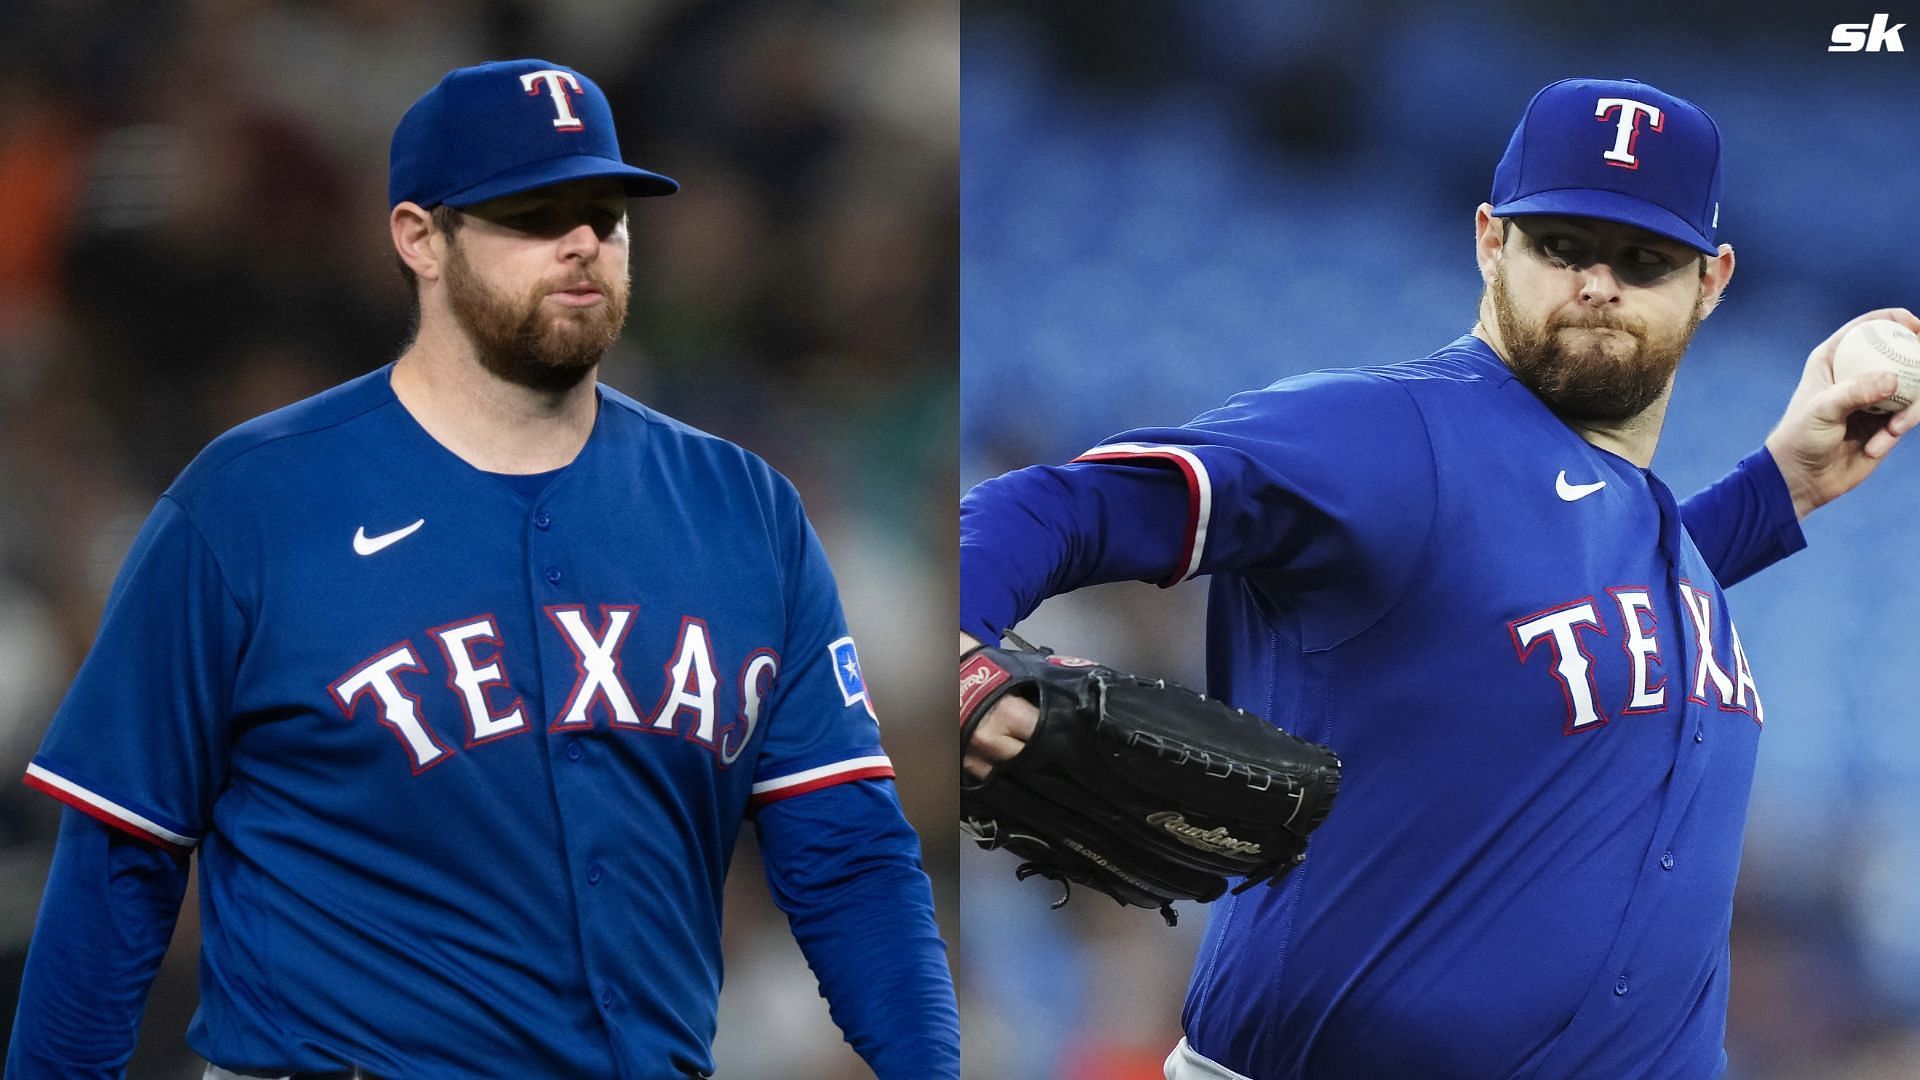 A Texas-based restaurant owner offers Jordan Montgomery free BBQ for life if he re-signs with Rangers